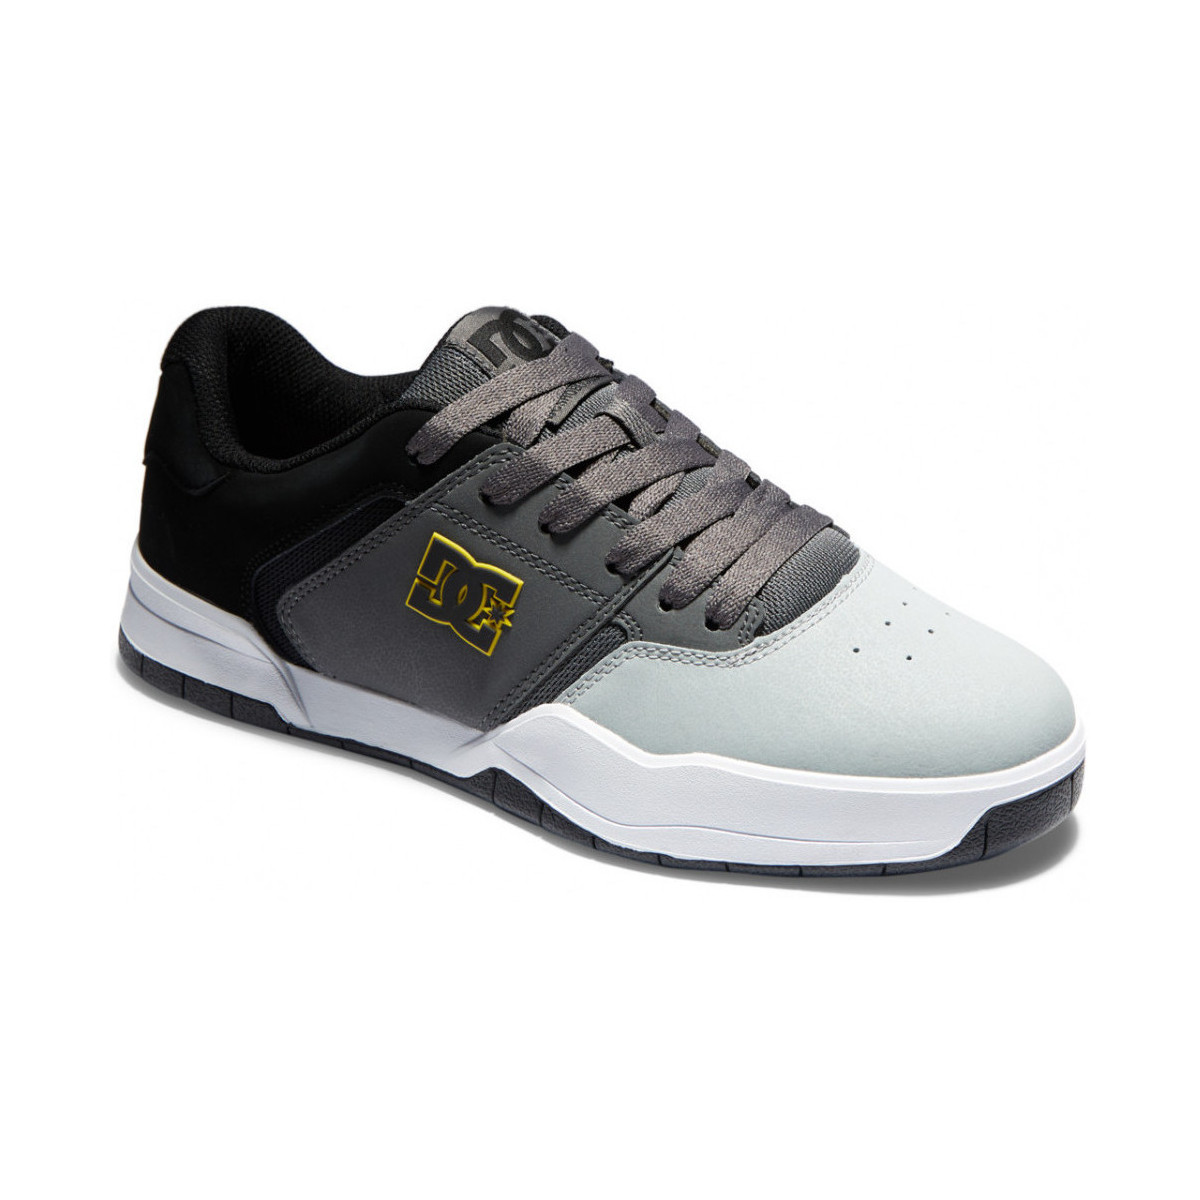 Chaussures Chaussures de Skate DC low-top Shoes CENTRAL black grey yellow Gris